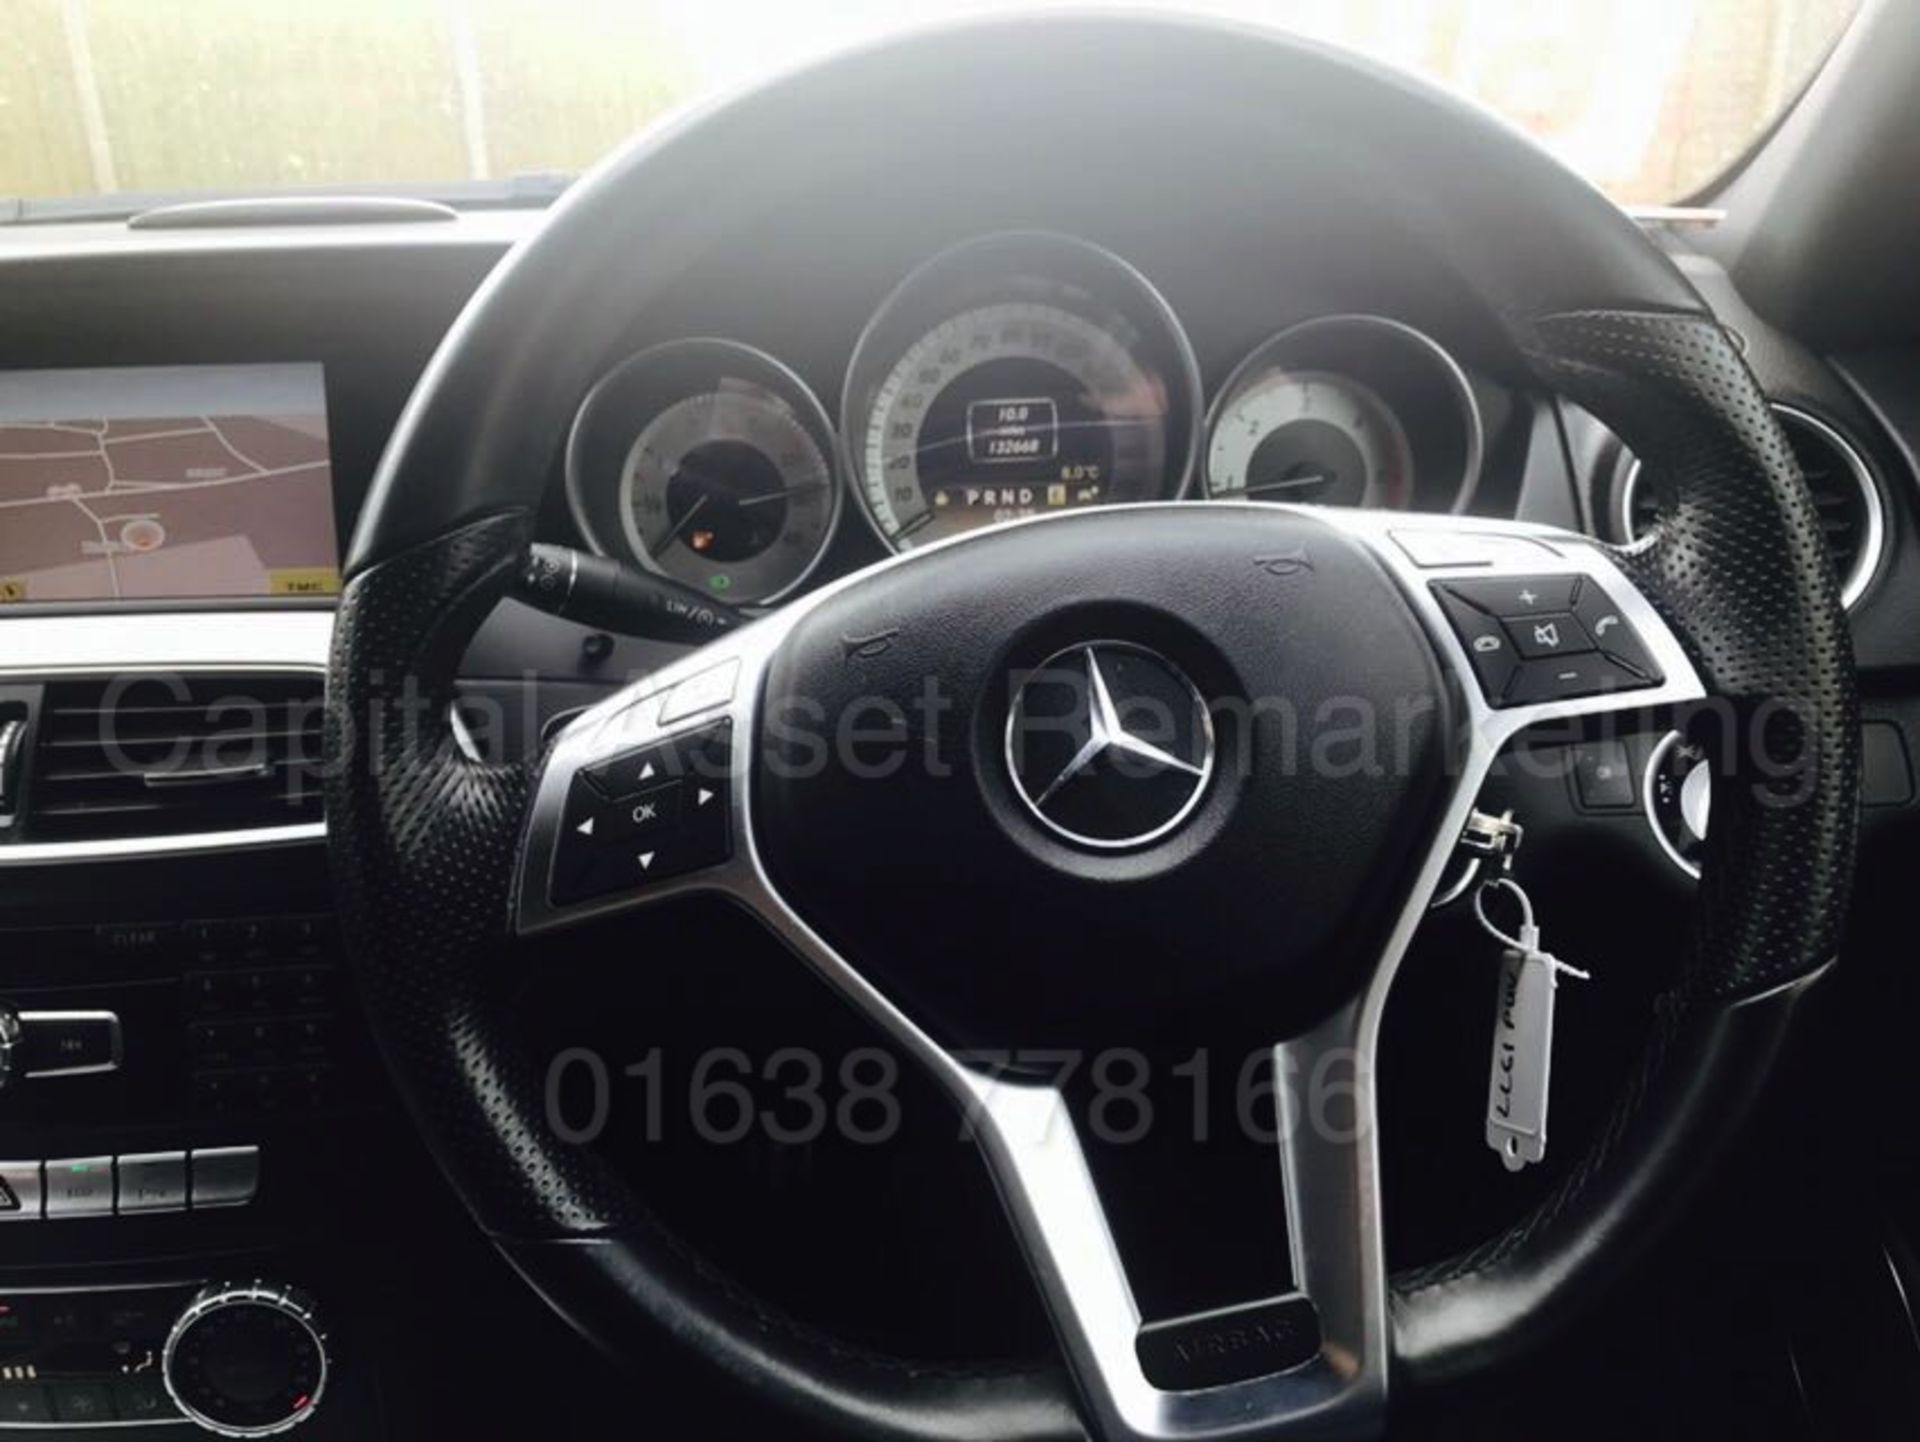 MERCEDES C220CDI "SPORT" ESTATE "125 EDITION" AUTOMATIC (2012 MODEL) SAT NAV - LEATHER - Image 17 of 19